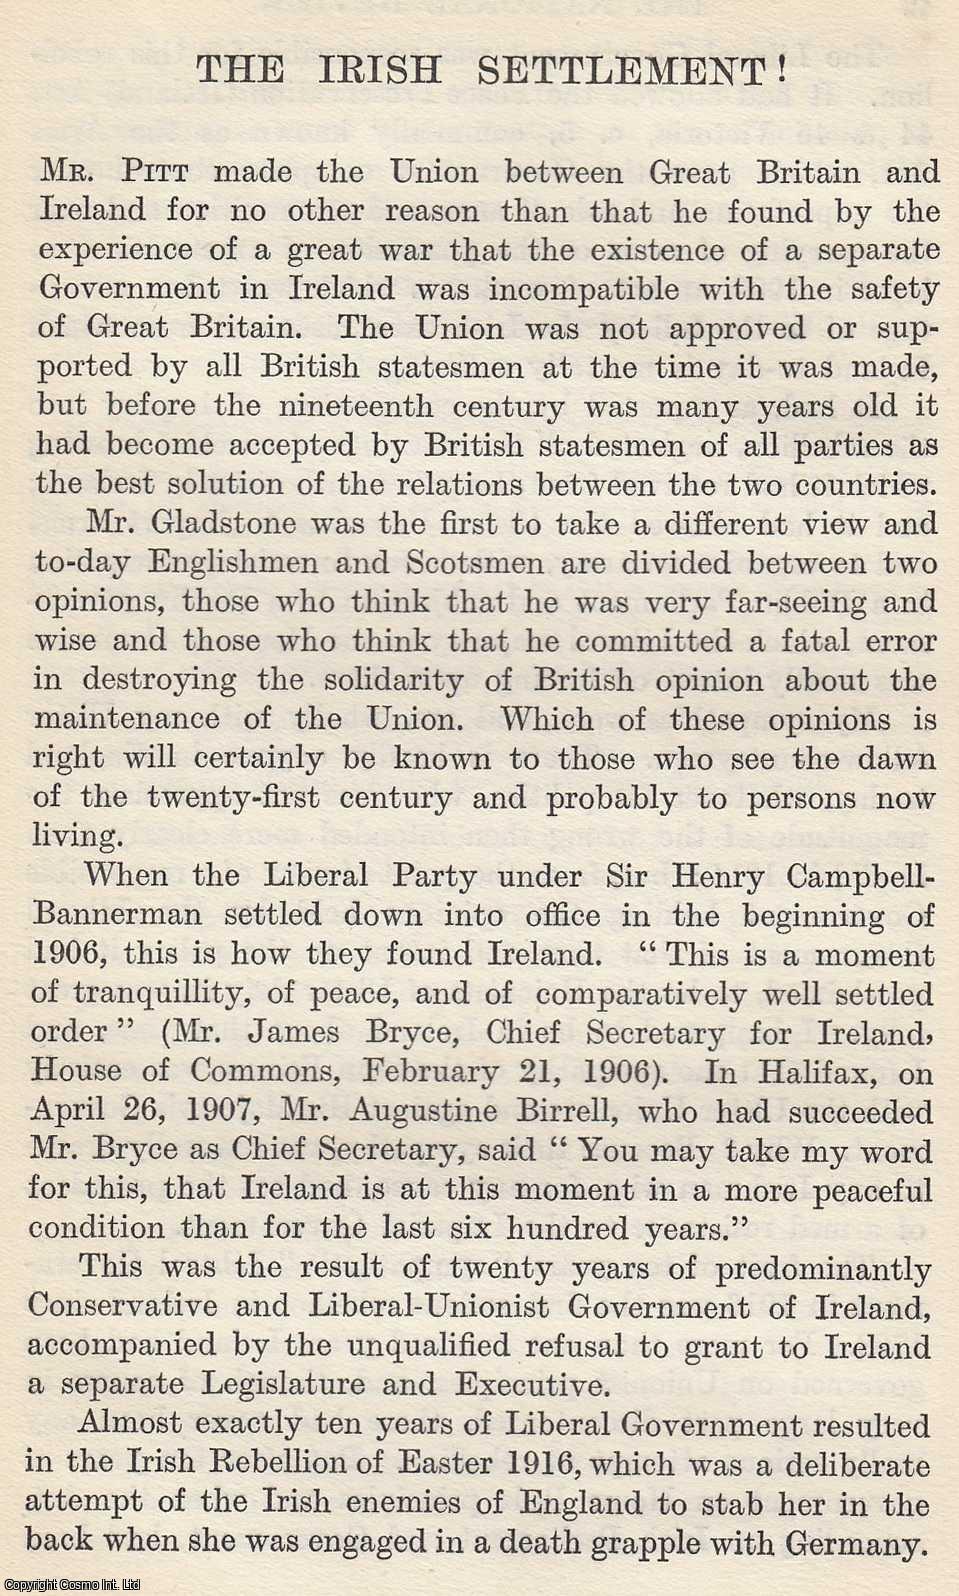 IRISH FREE STATE - The Irish Settlement. By The Earl of Selborne, K.G. An original article from The National Review, 1923.